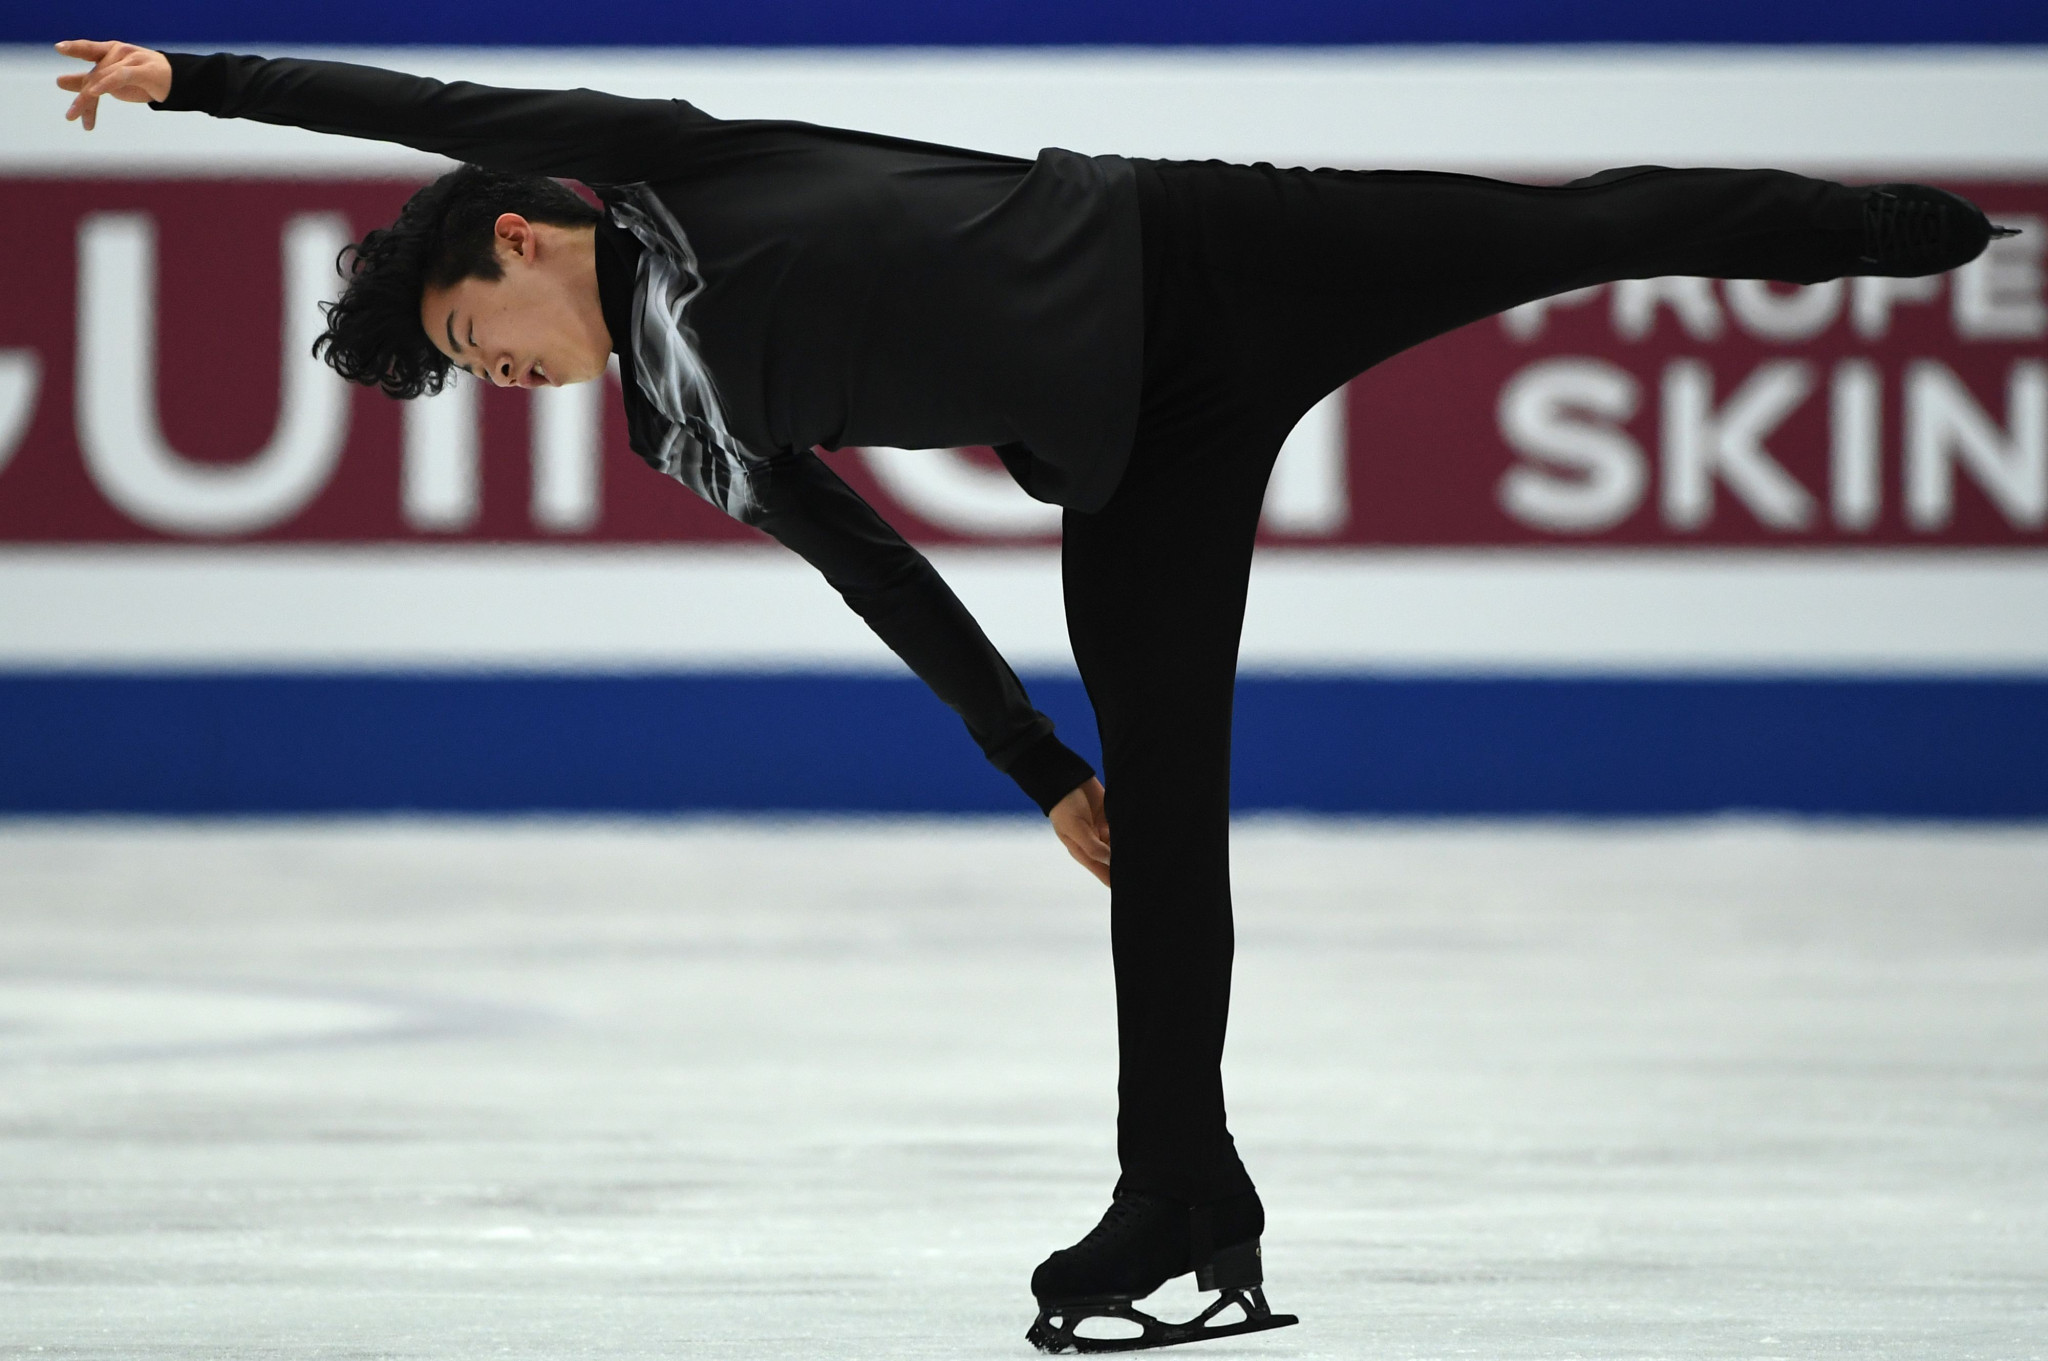 World champion Nathan Chen of the United States will compete at the ISU World Team Trophy ©Getty Images